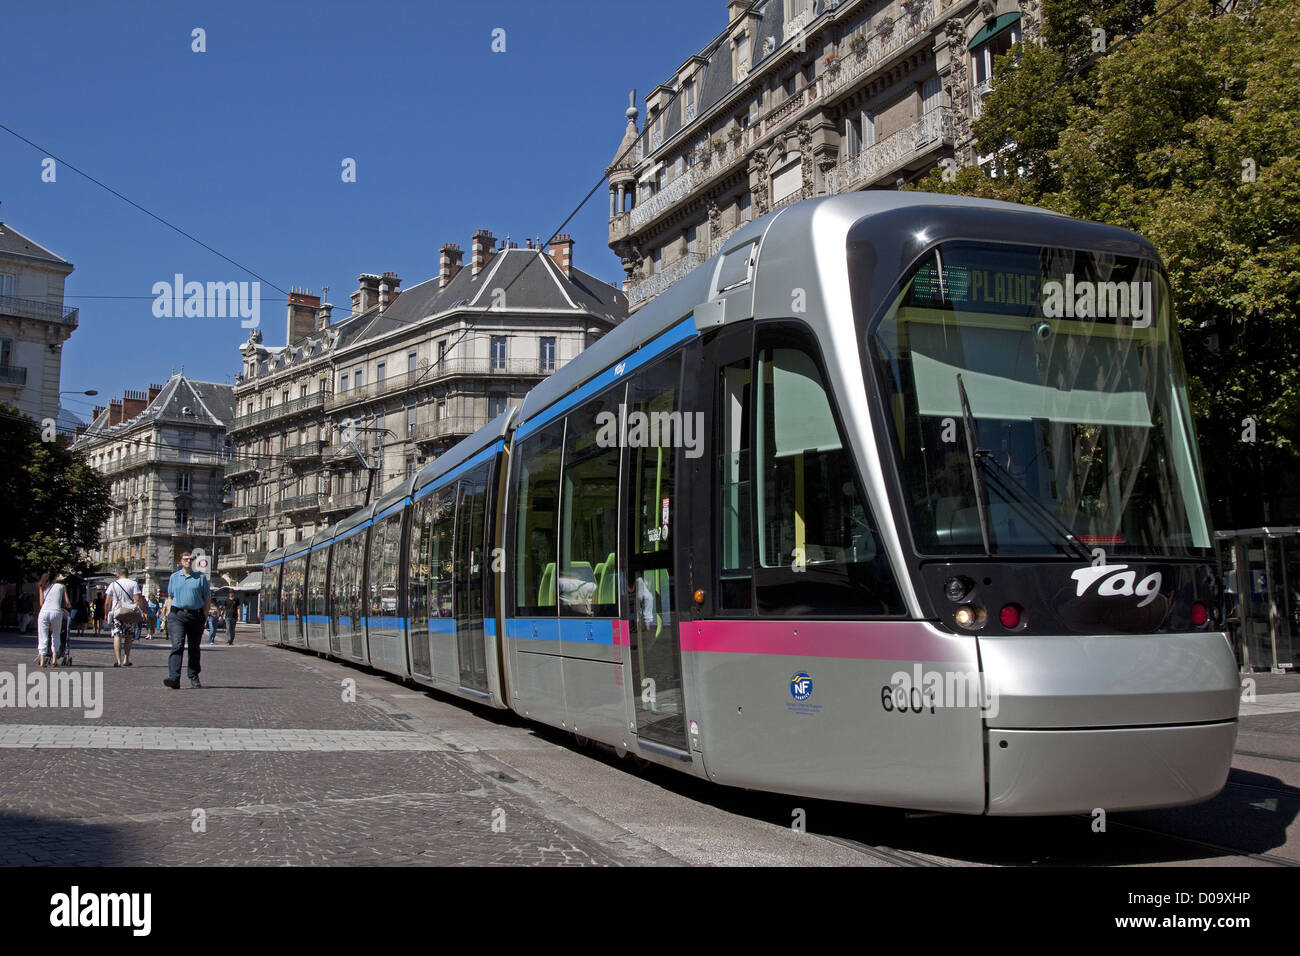 REGIE TAG TRAMWAY CROSSING GRENETTE SQUARE GRENOBLE ISERE RHONE-ALPES FRANCE Stock Photo